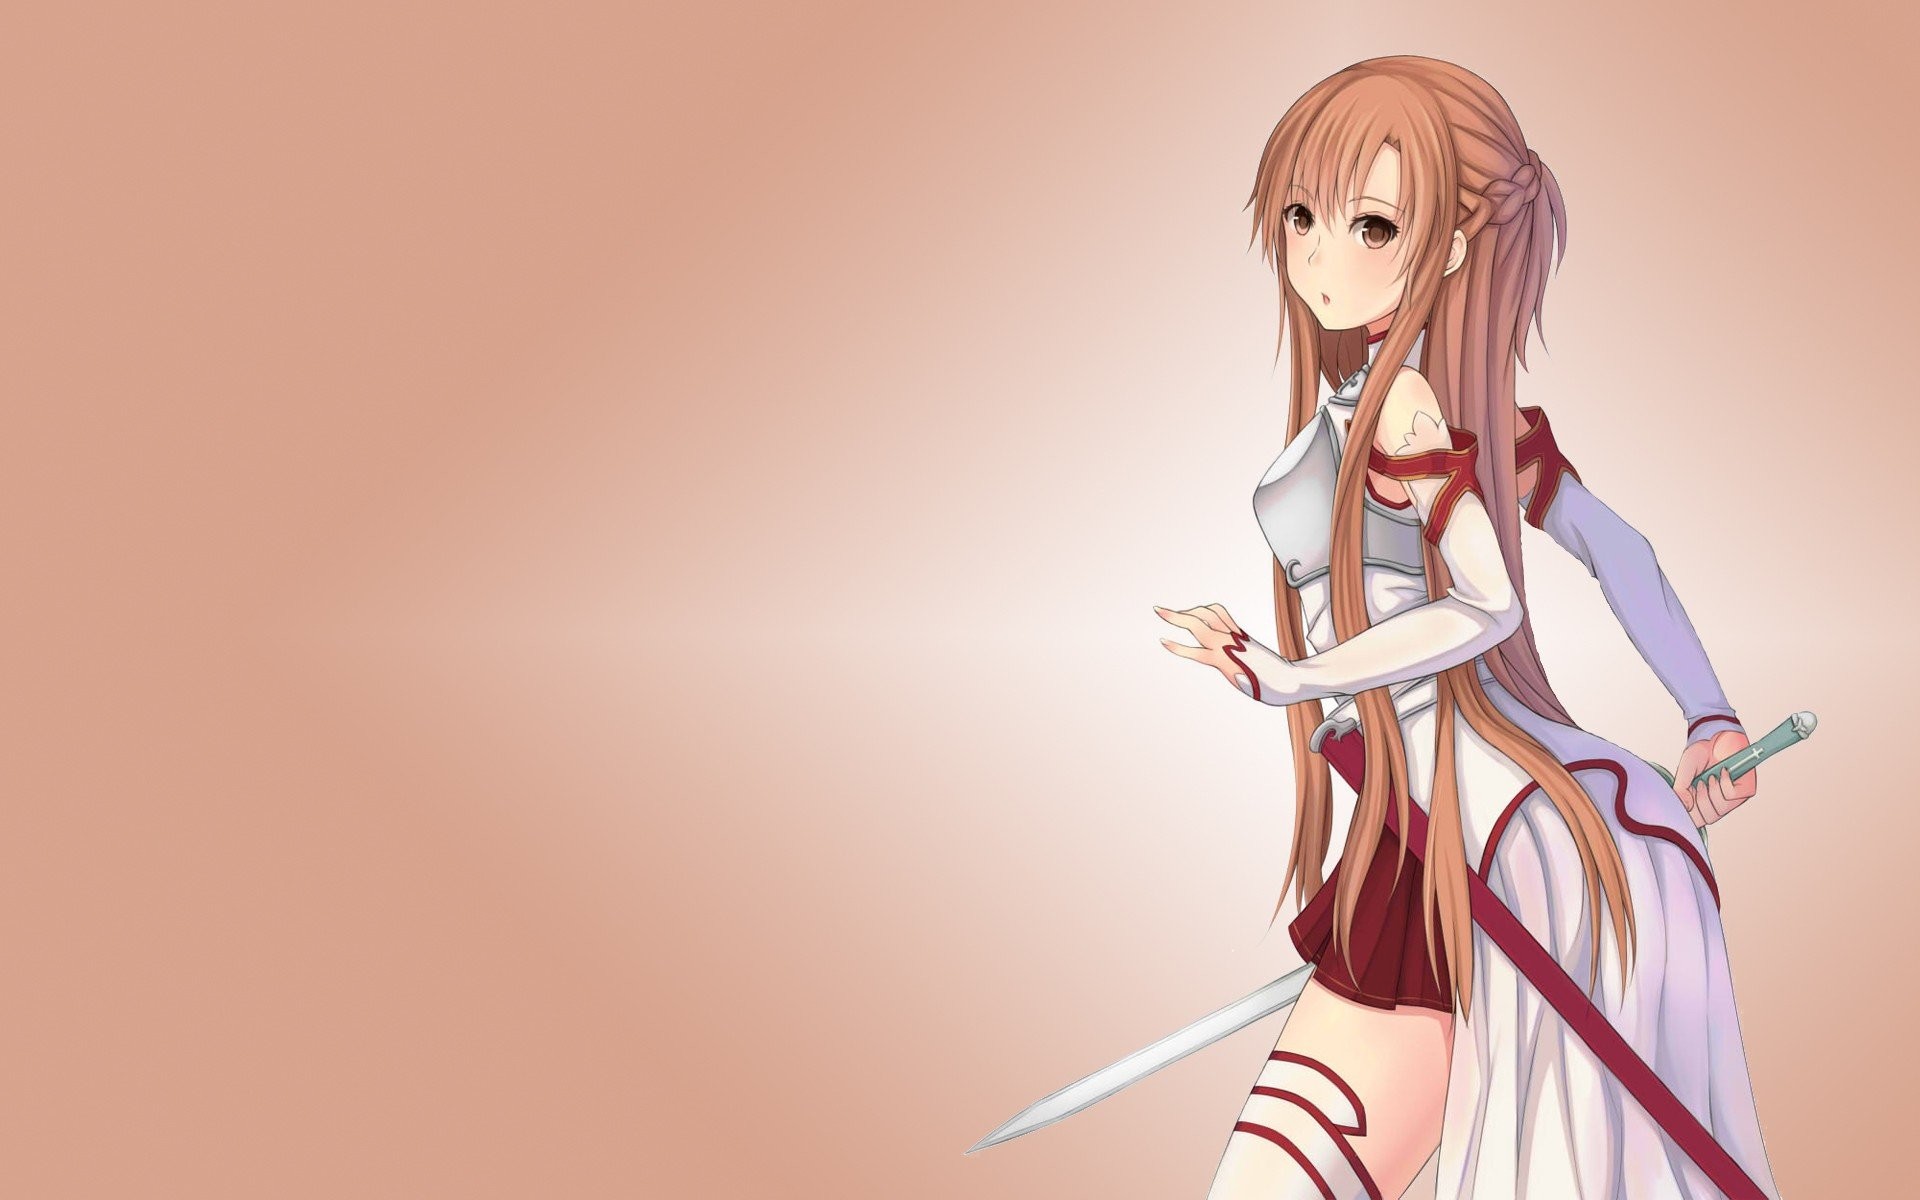 Anime Girl With Long Brown Hair And Brown Eyes HD Wide Wallpaper for Widescreen 89 Wallpapers HD Wallpapers